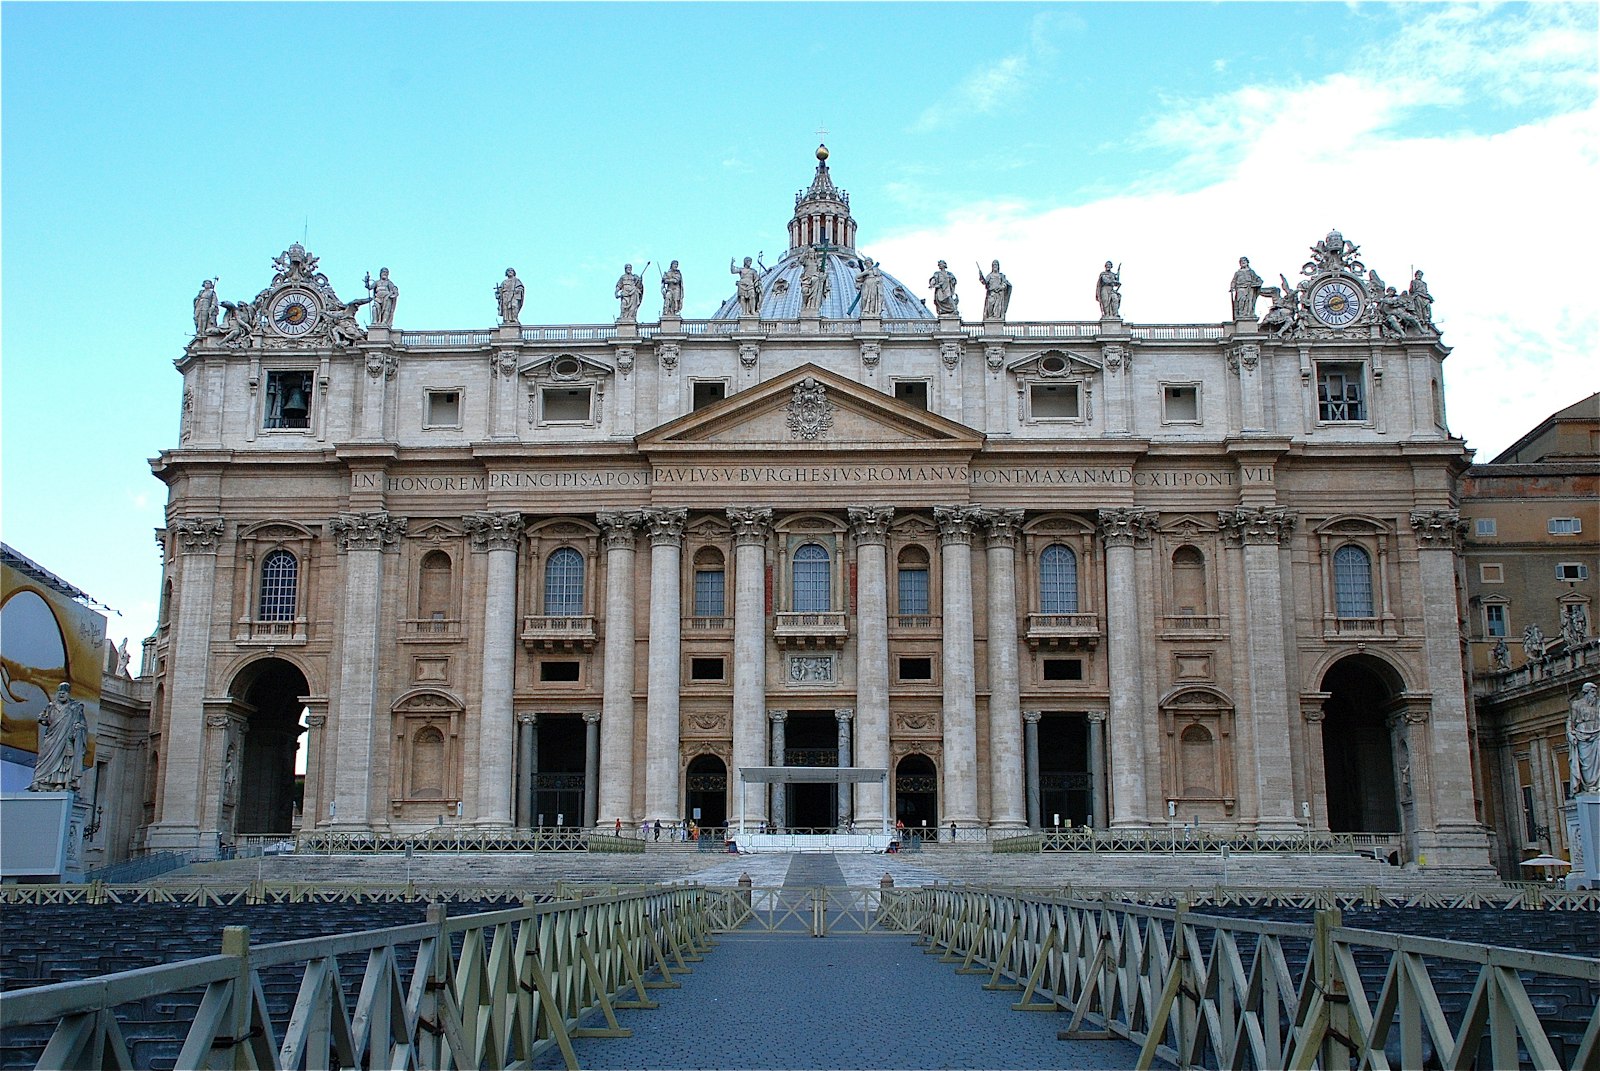 A photograph of St. Peter's Basilica that appears in Panyard's book. Unlike secular art, religious cathedrals, sculptures and paintings had a way of lifting Panyard's soul to God, she says. (Courtesy of Christine Panyard)